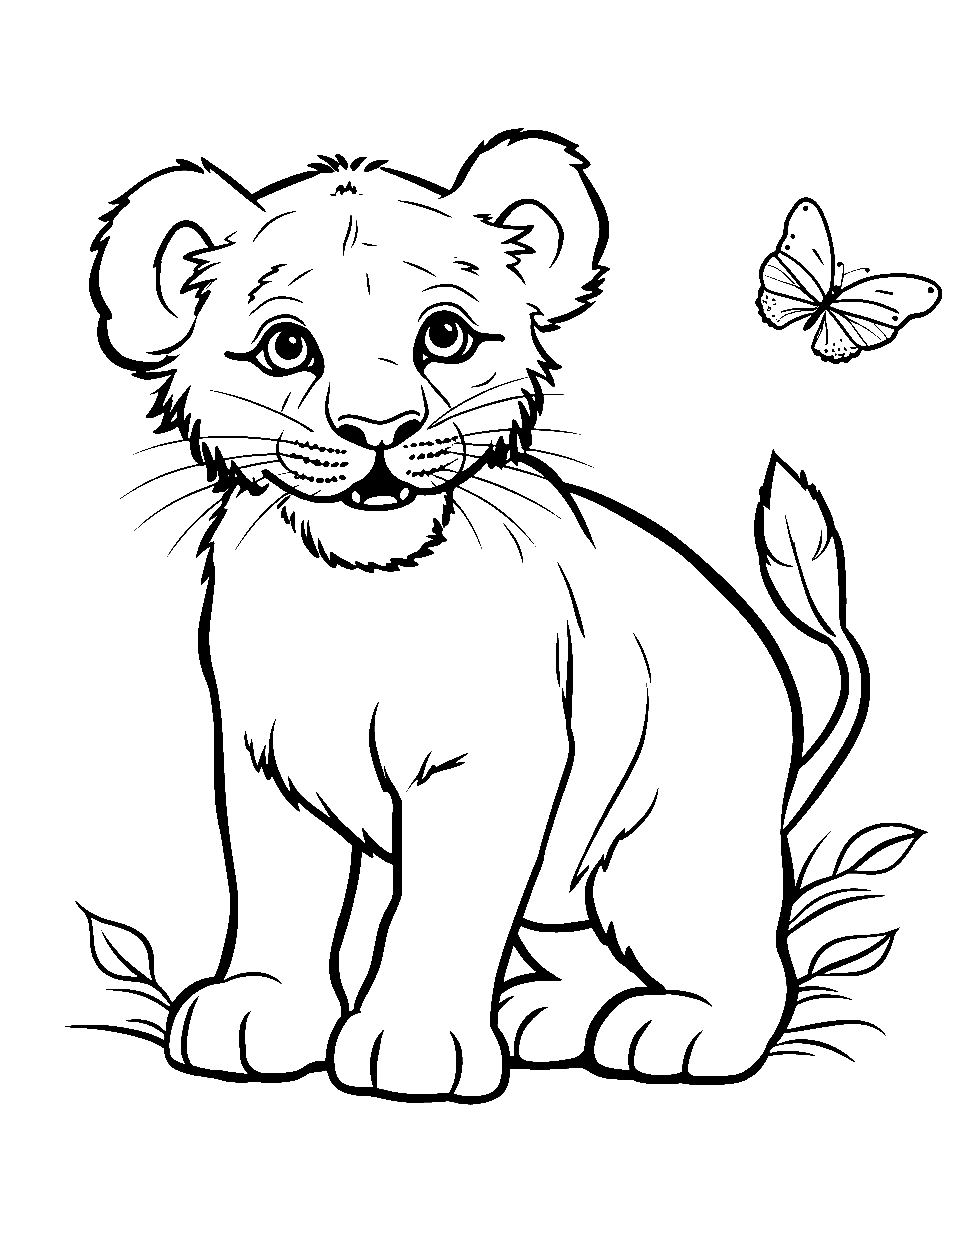 Playful Lion Cub Coloring Page - A young cub playing with a butterfly.